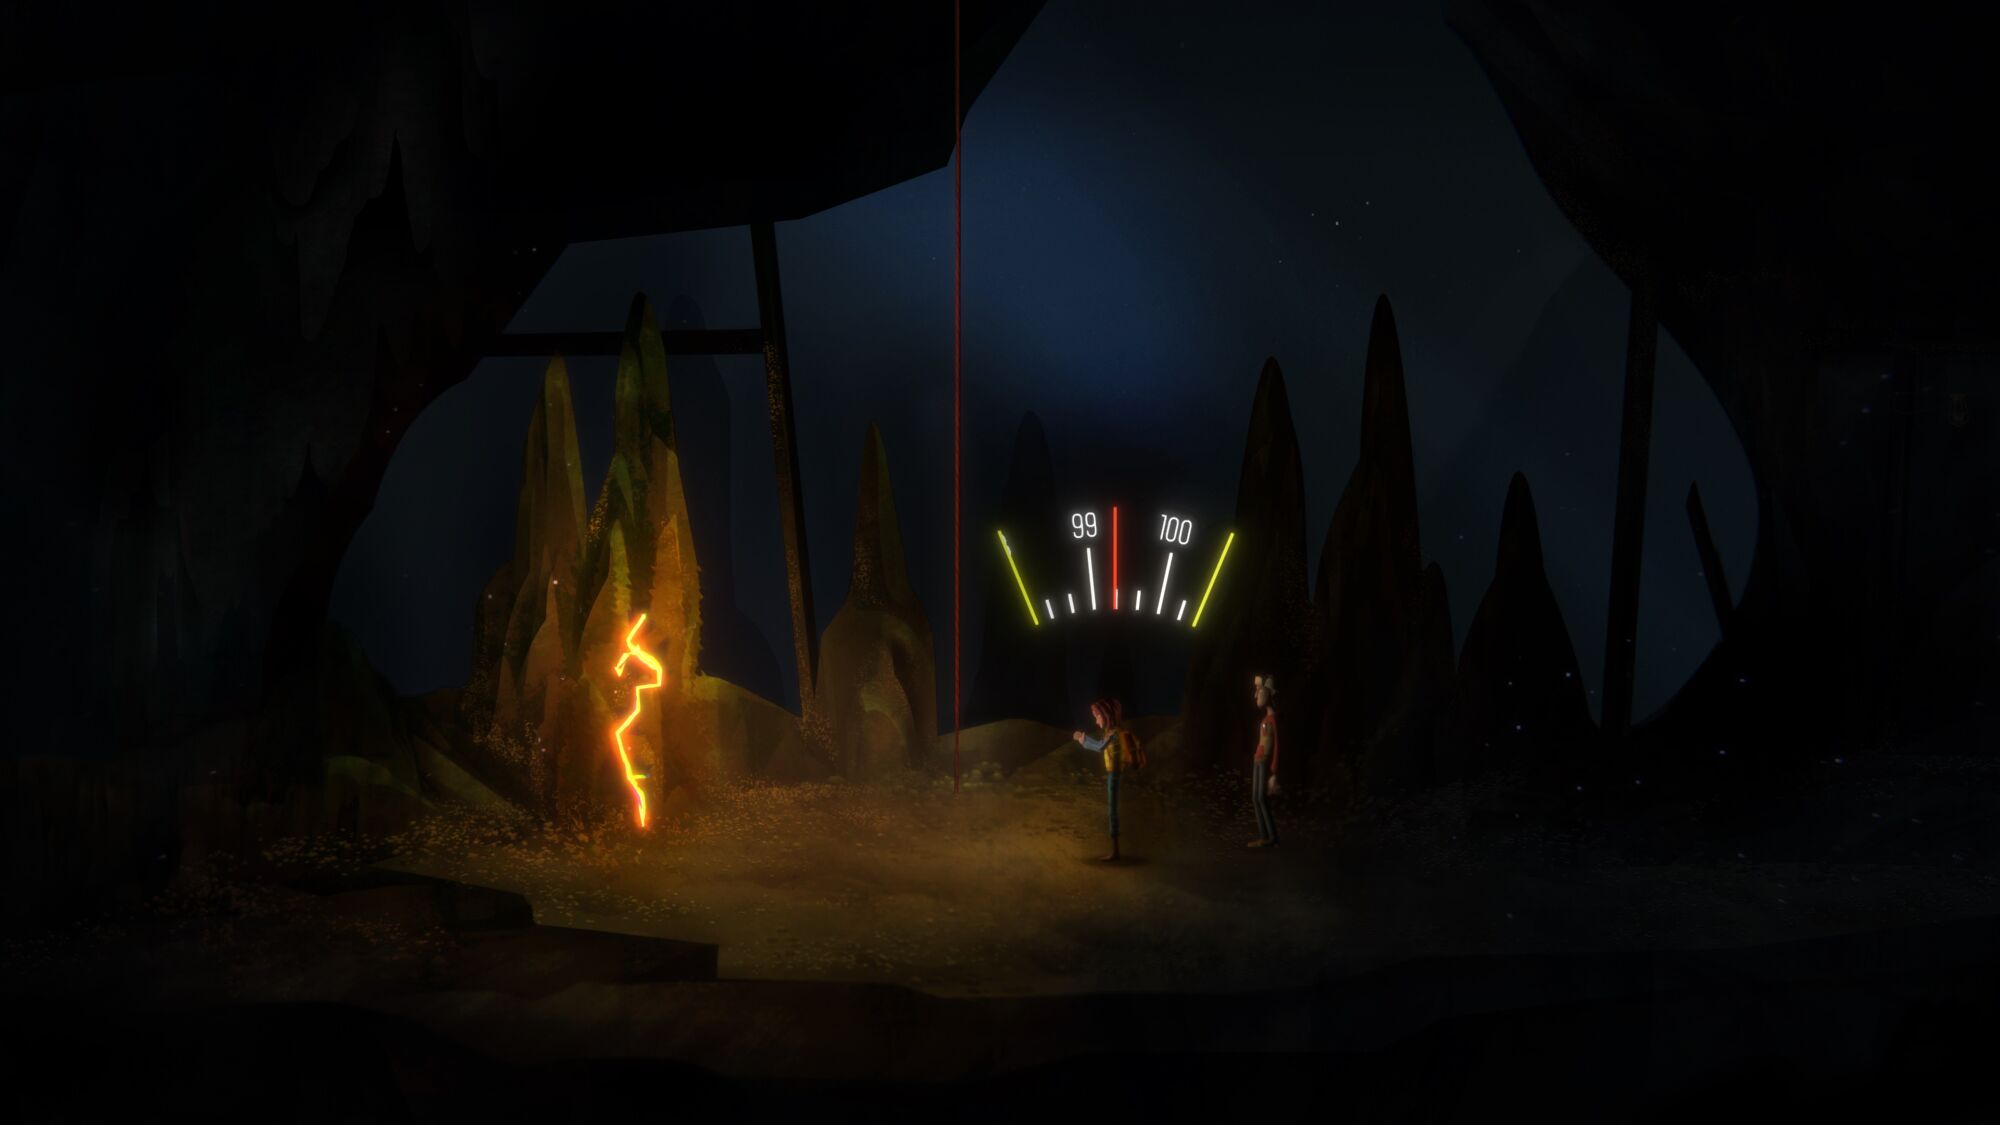 Explore a mystical, ghostly world in "Oxenfree II: Lost Signals."